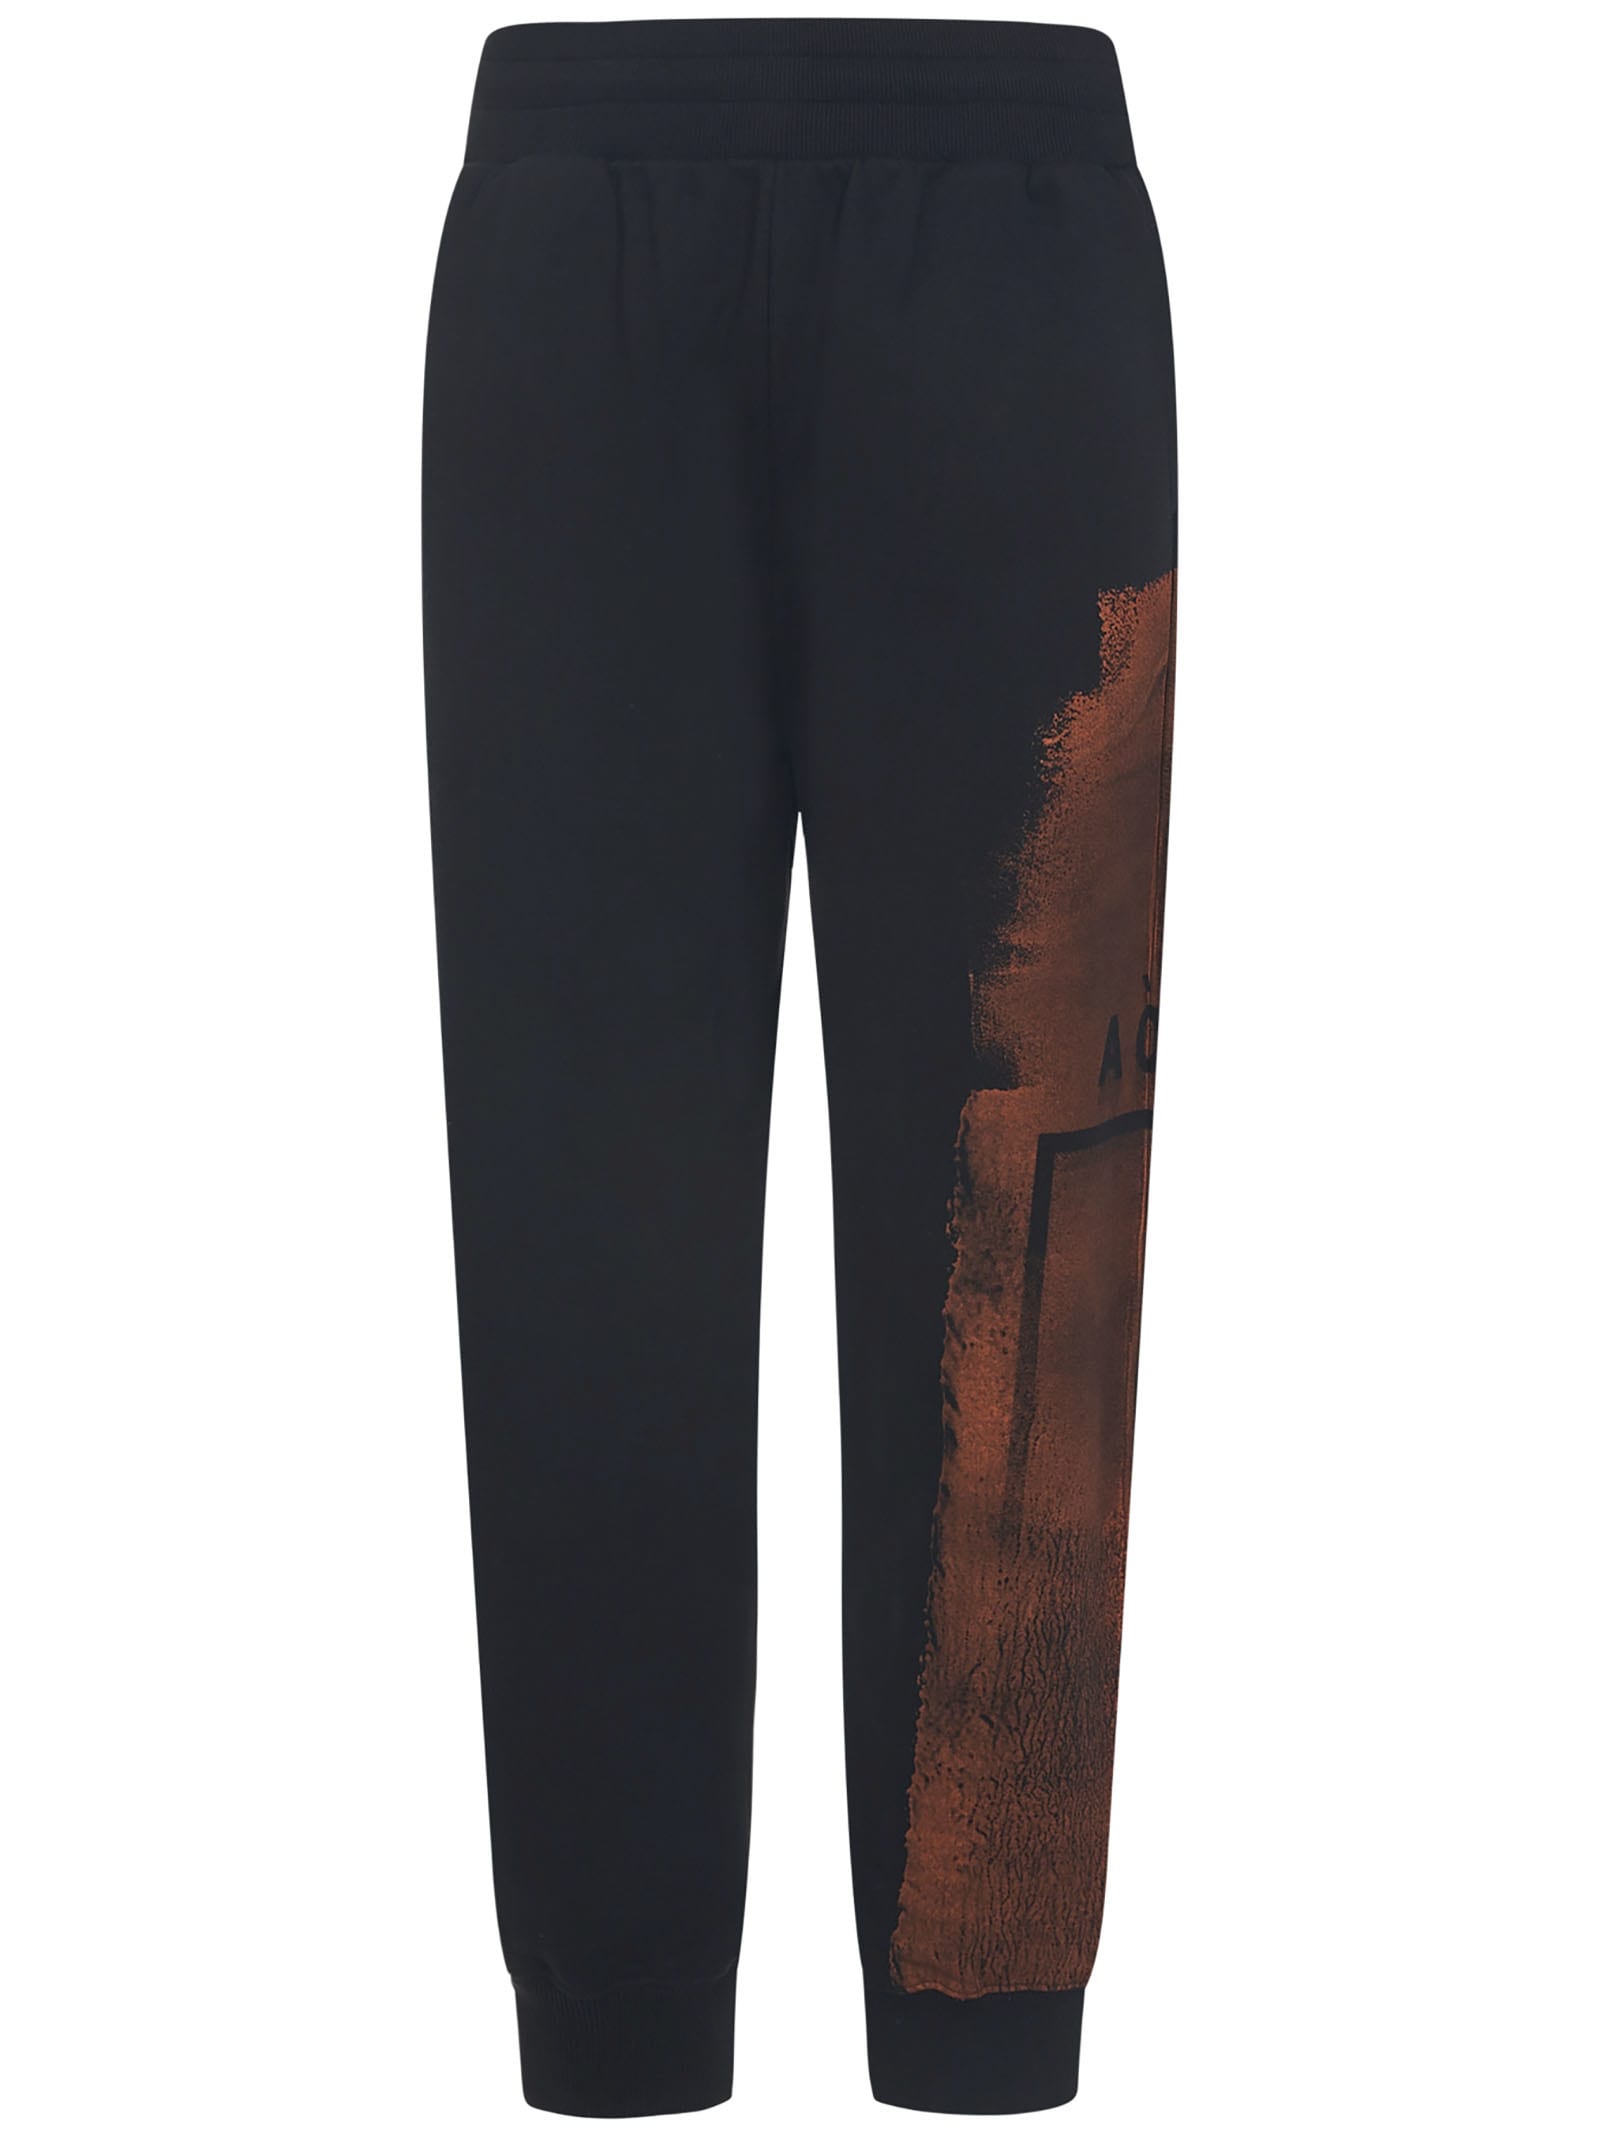 A-COLD-WALL Collage Trousers